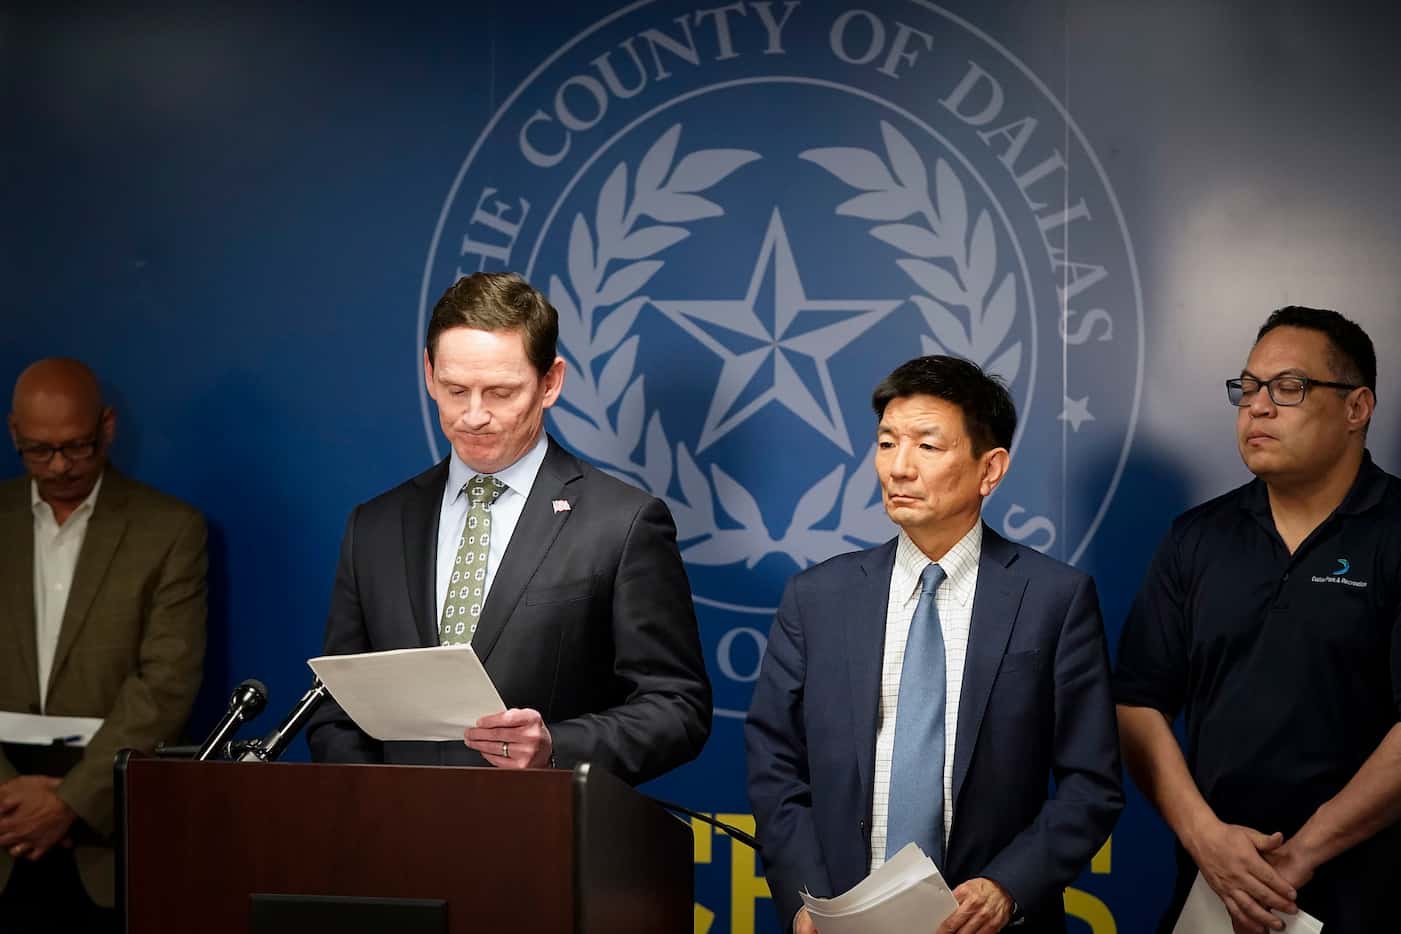 Dallas County Judge Clay Jenkins announces that a local state of disaster for public health...